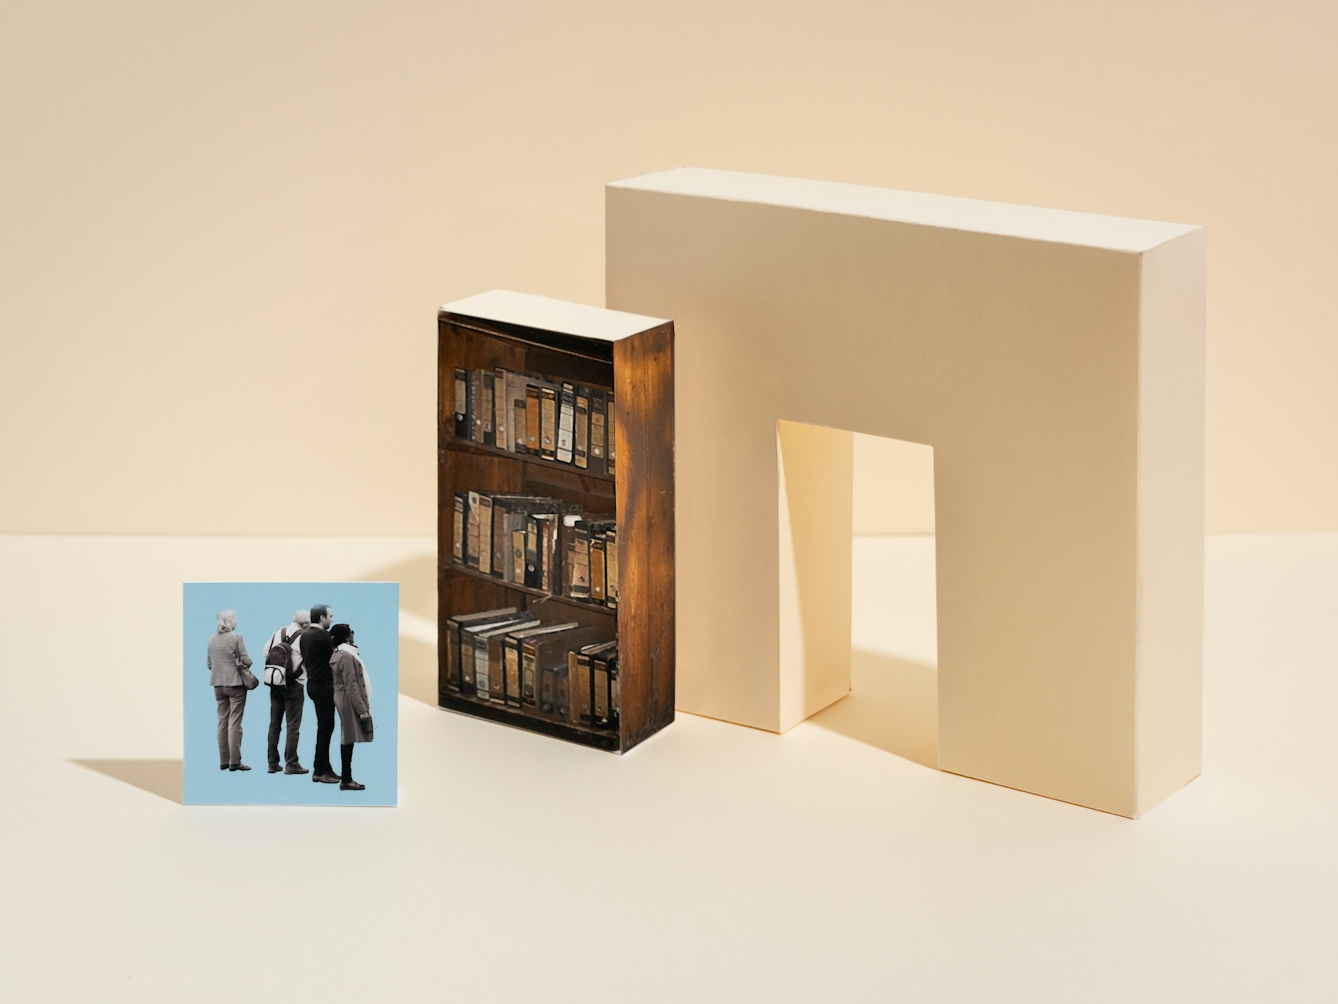 Photograph of a set built scene. The scene is made out of a light cream horizontal surface against a light cream vertical background with a thin horizon line. On the horizontal surface are two three-dimensional shapes. The shape on the right is a light cream wall with a doorway though the centre. To the left of the doorway is another rectangular cuboid which is covered in a printed surface showing 3 book shelves containing archive lever arch folders. To the left of the bookshelf is a rectangular flat blue card standing upright, on which is the black and white image of a group of people from behind looking towards the book shelf.